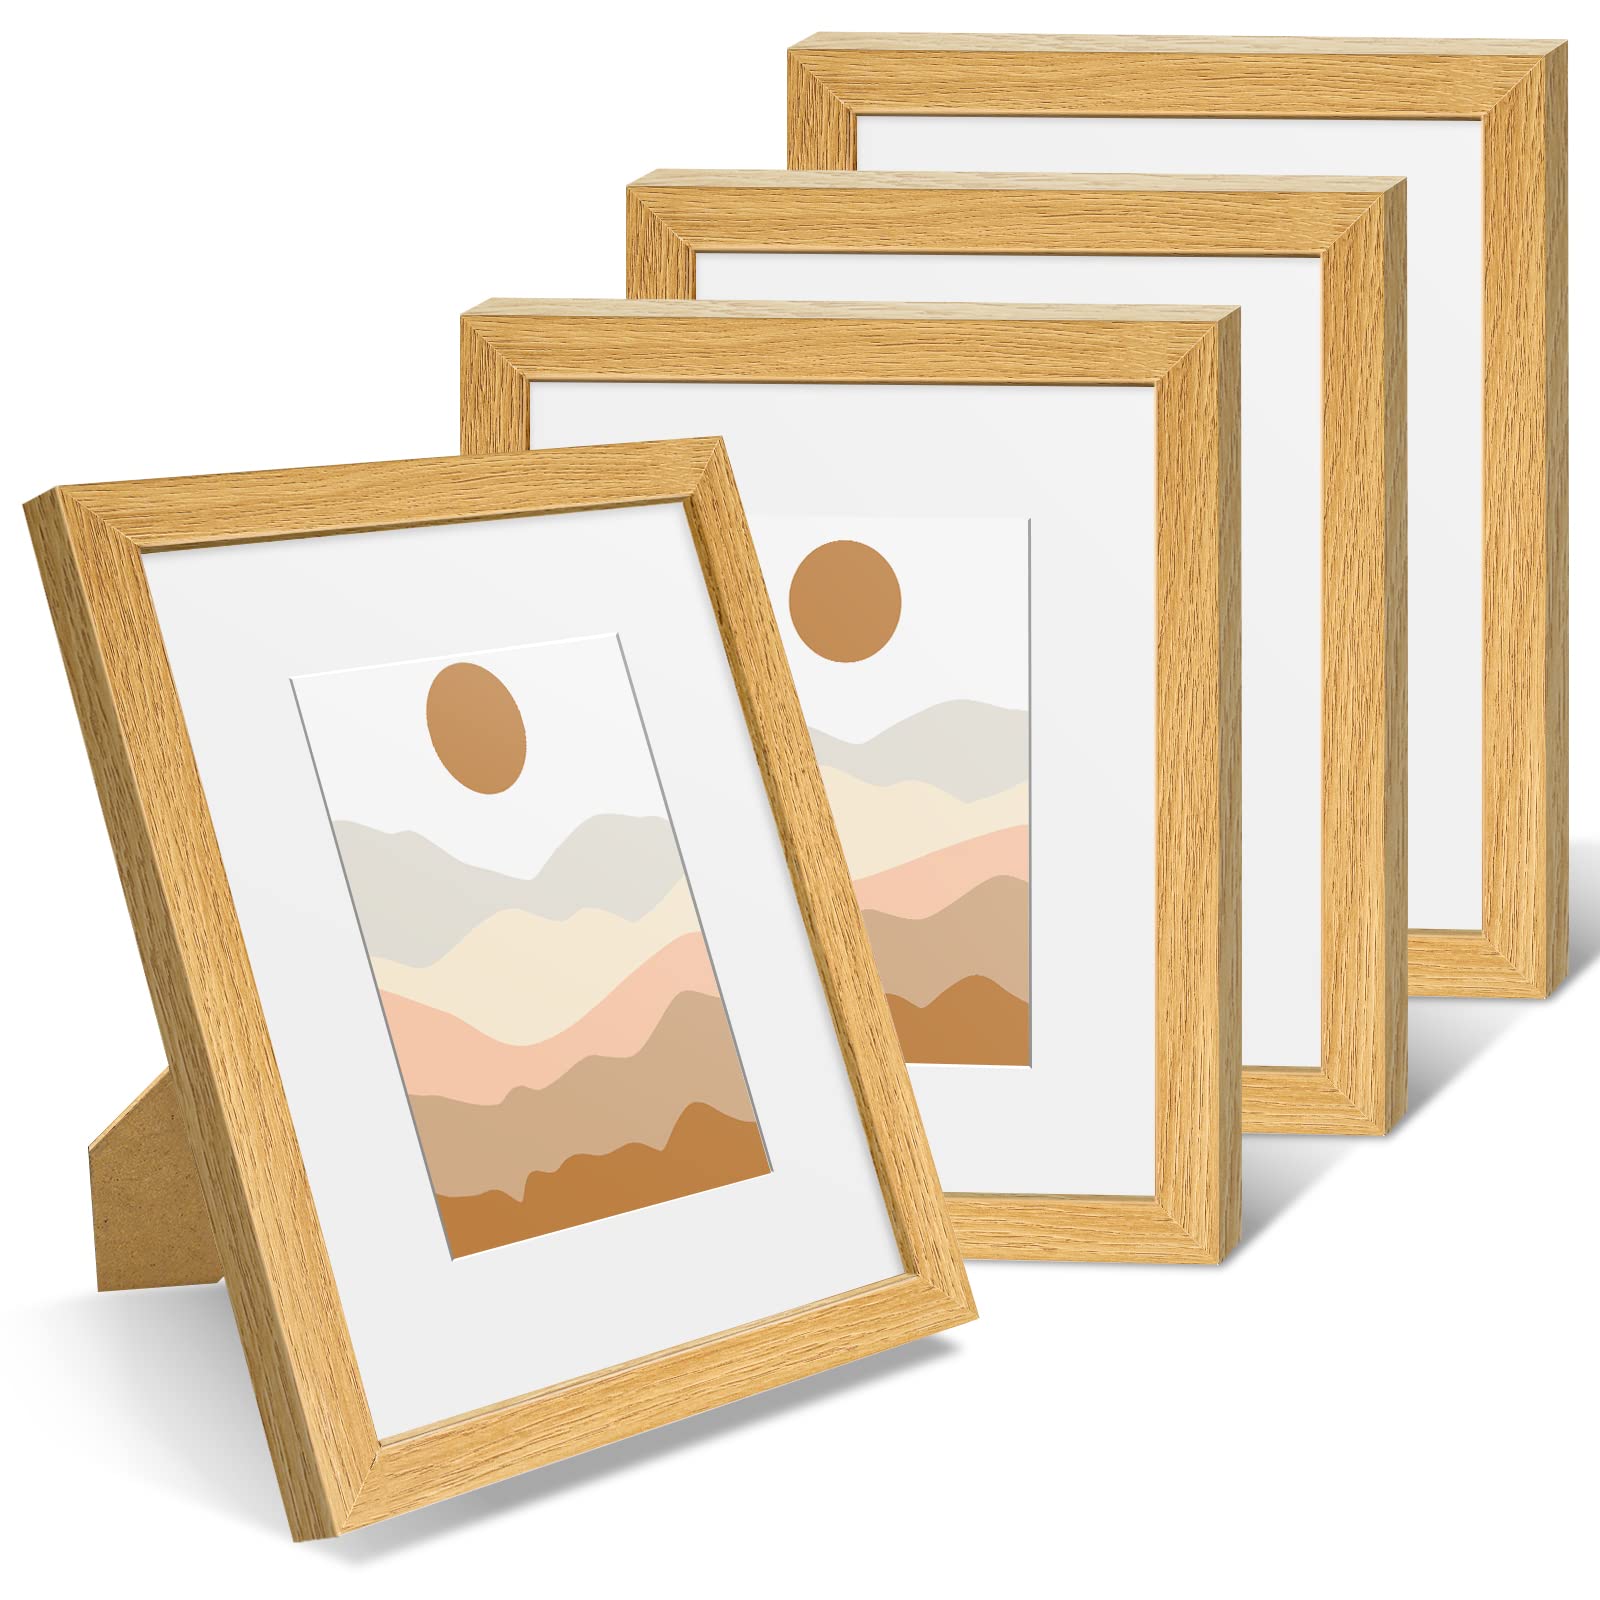 Nacial Picture Frames 8x10 inch Set of 4, Photo Frame Display 5x7 Photo with Mat, Display 8x10 photo without Mat, Picture Frames